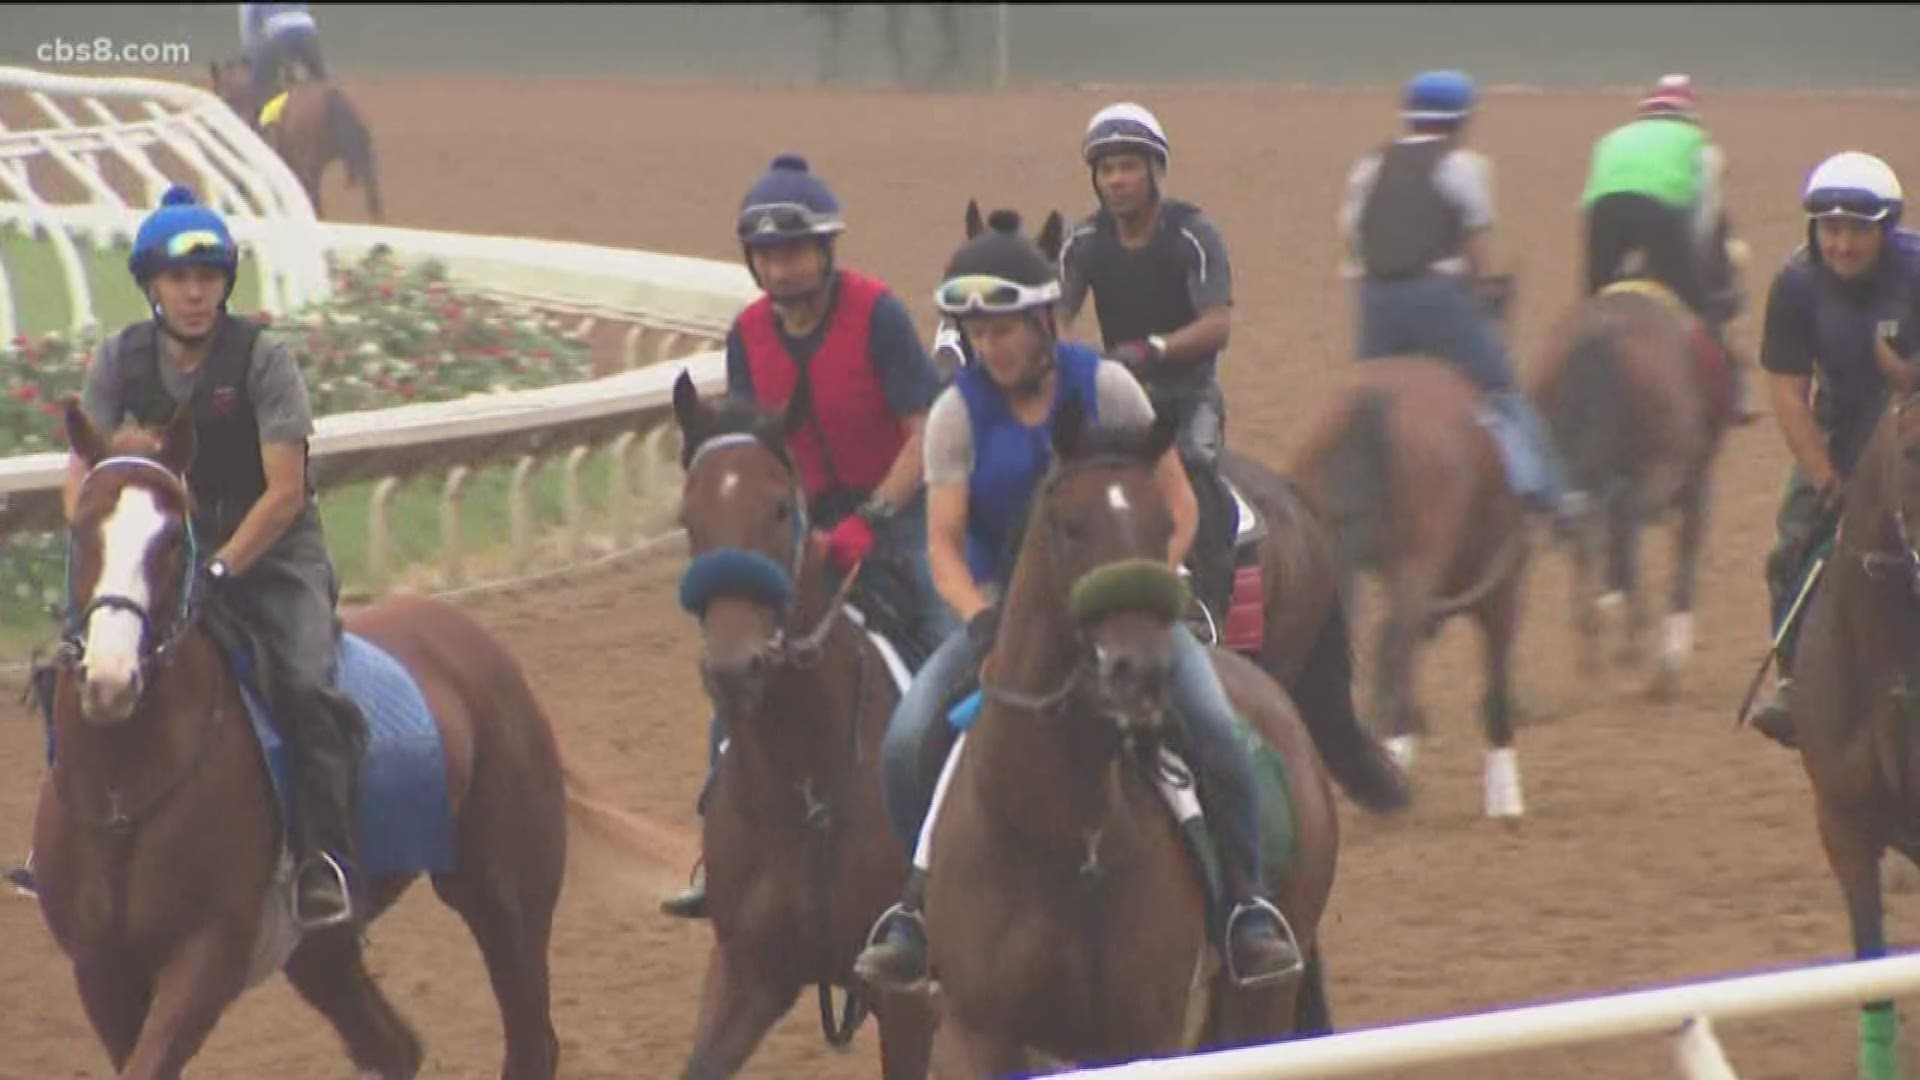 Track officials say the two horses collided on the track during Thursday morning's workout.